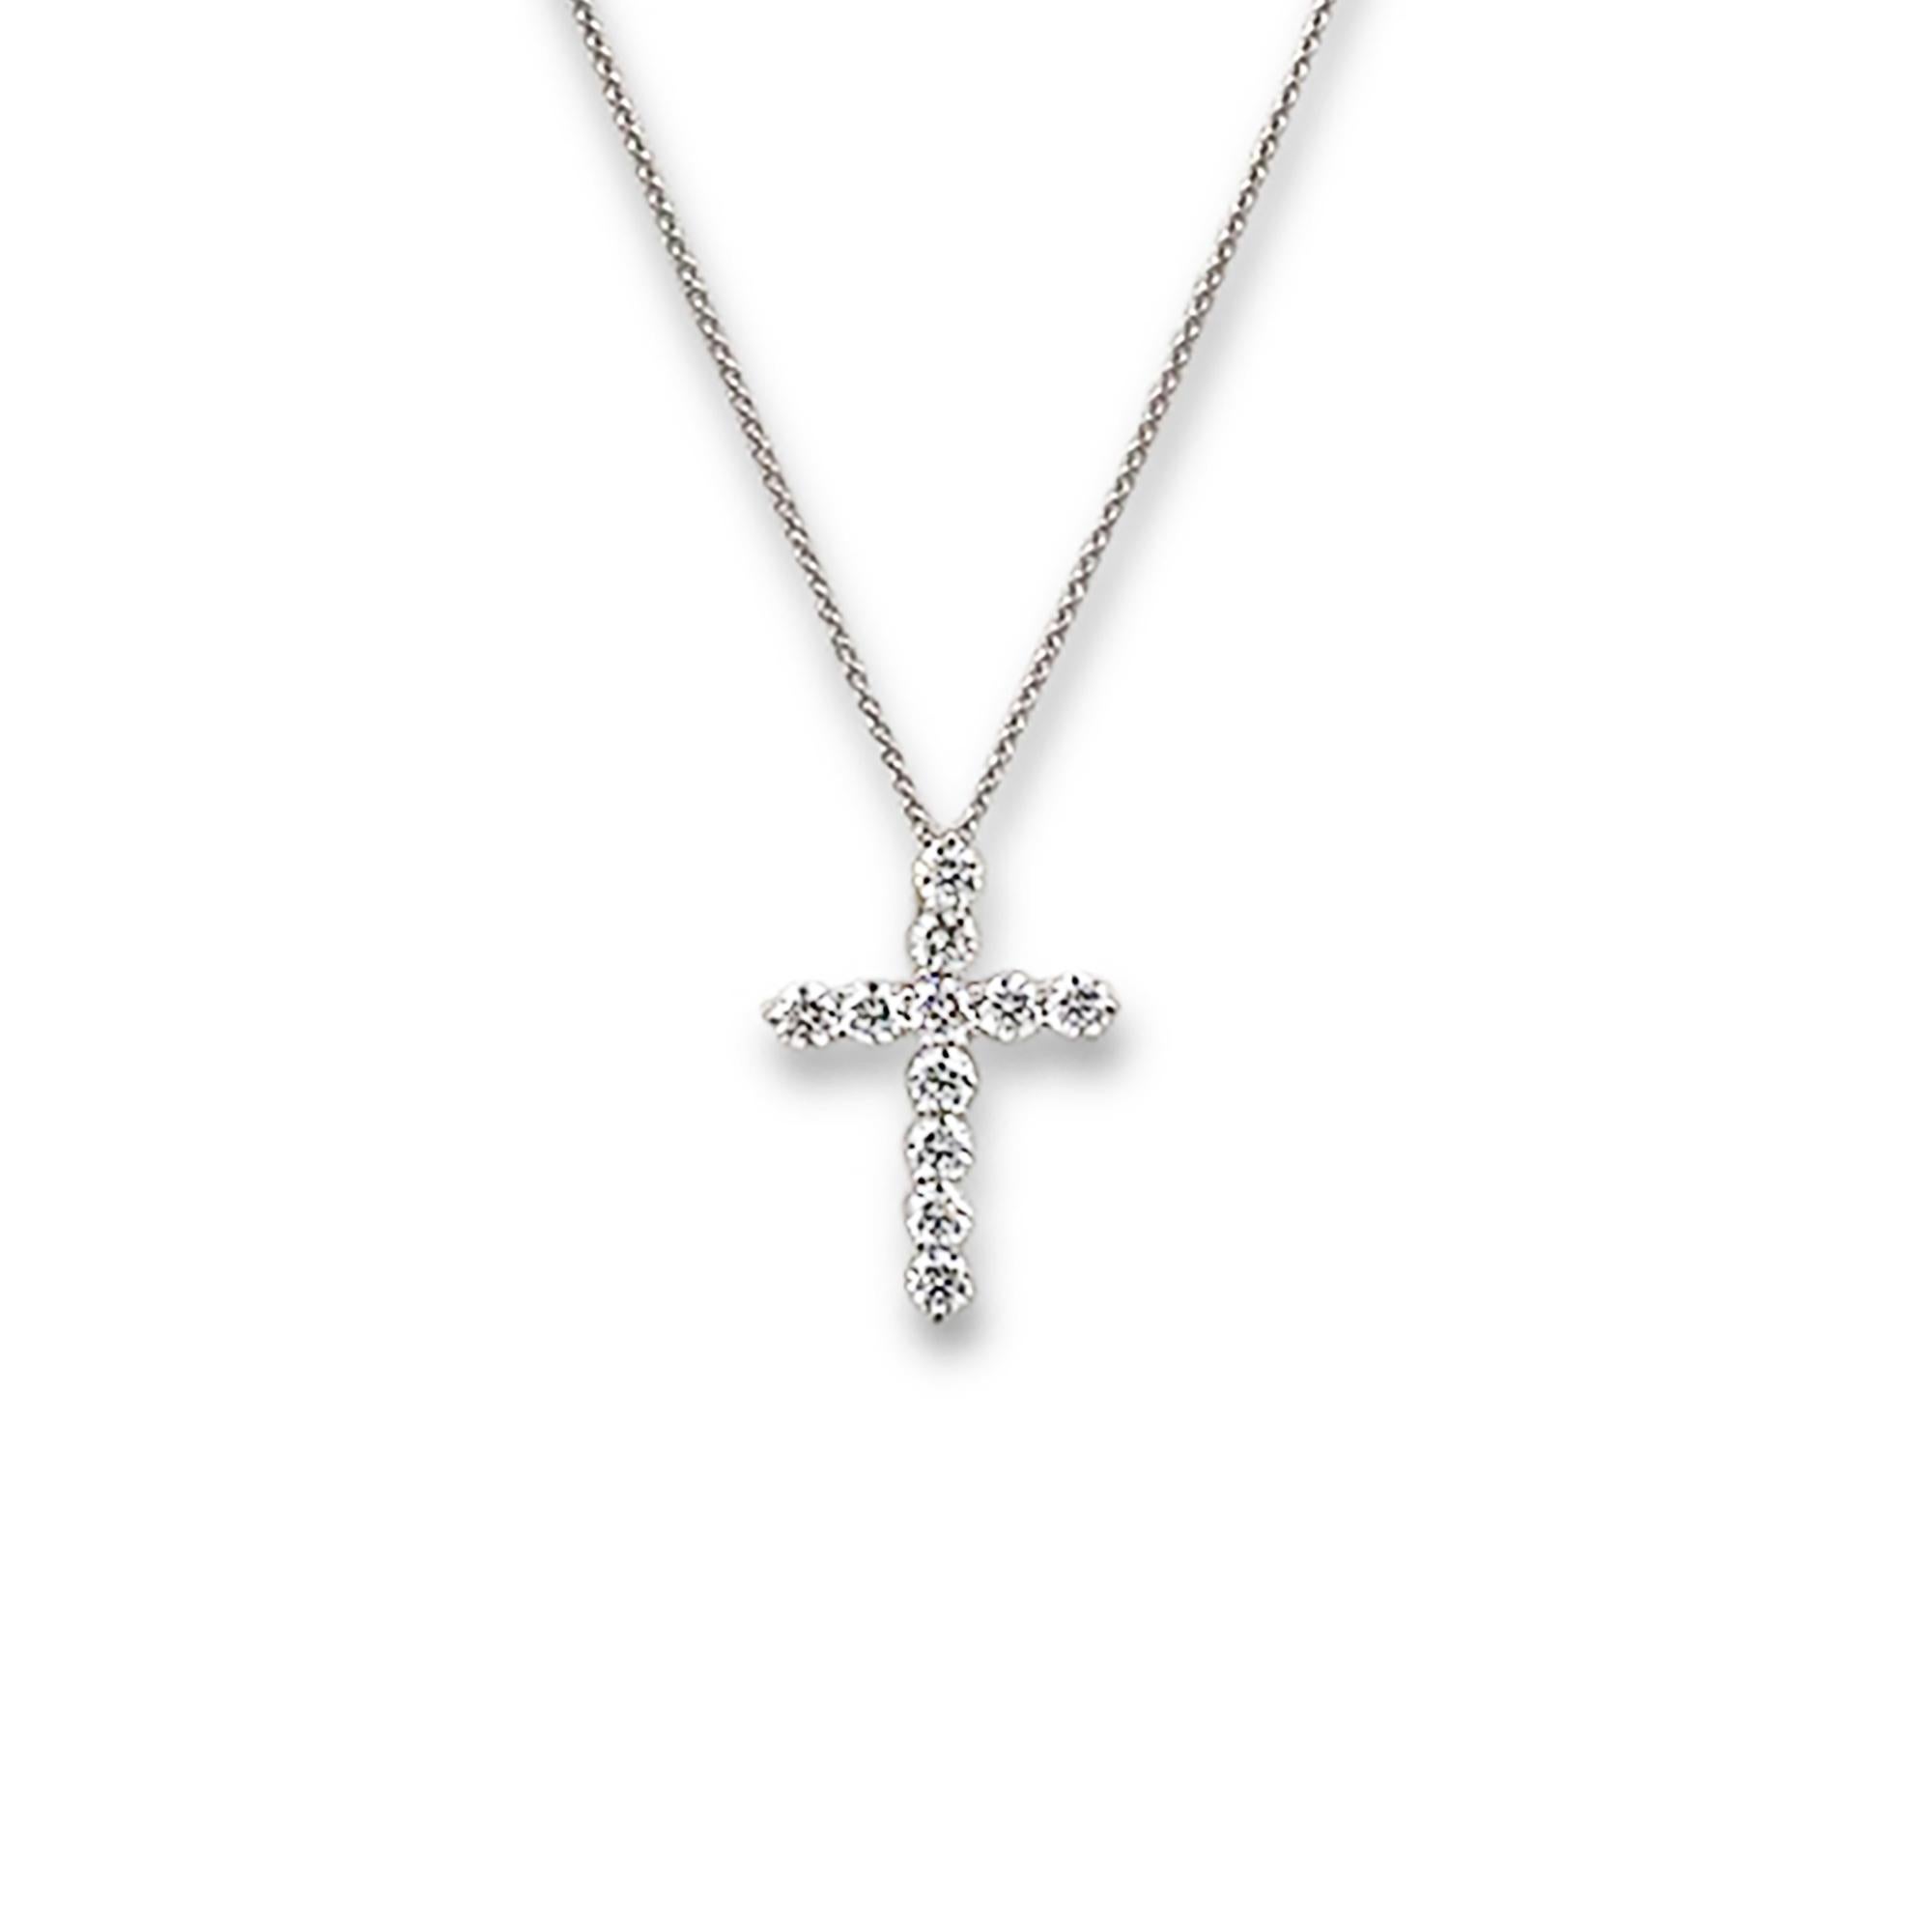 Authentic Tiffany & Co. large cross pendant crafted in platinum and set with 11 glittering round brilliant diamonds (E-F color, VS1 clarity) of approximately 1.71 carats total weight.  The pendant is situated on a delicate platinum chain measuring